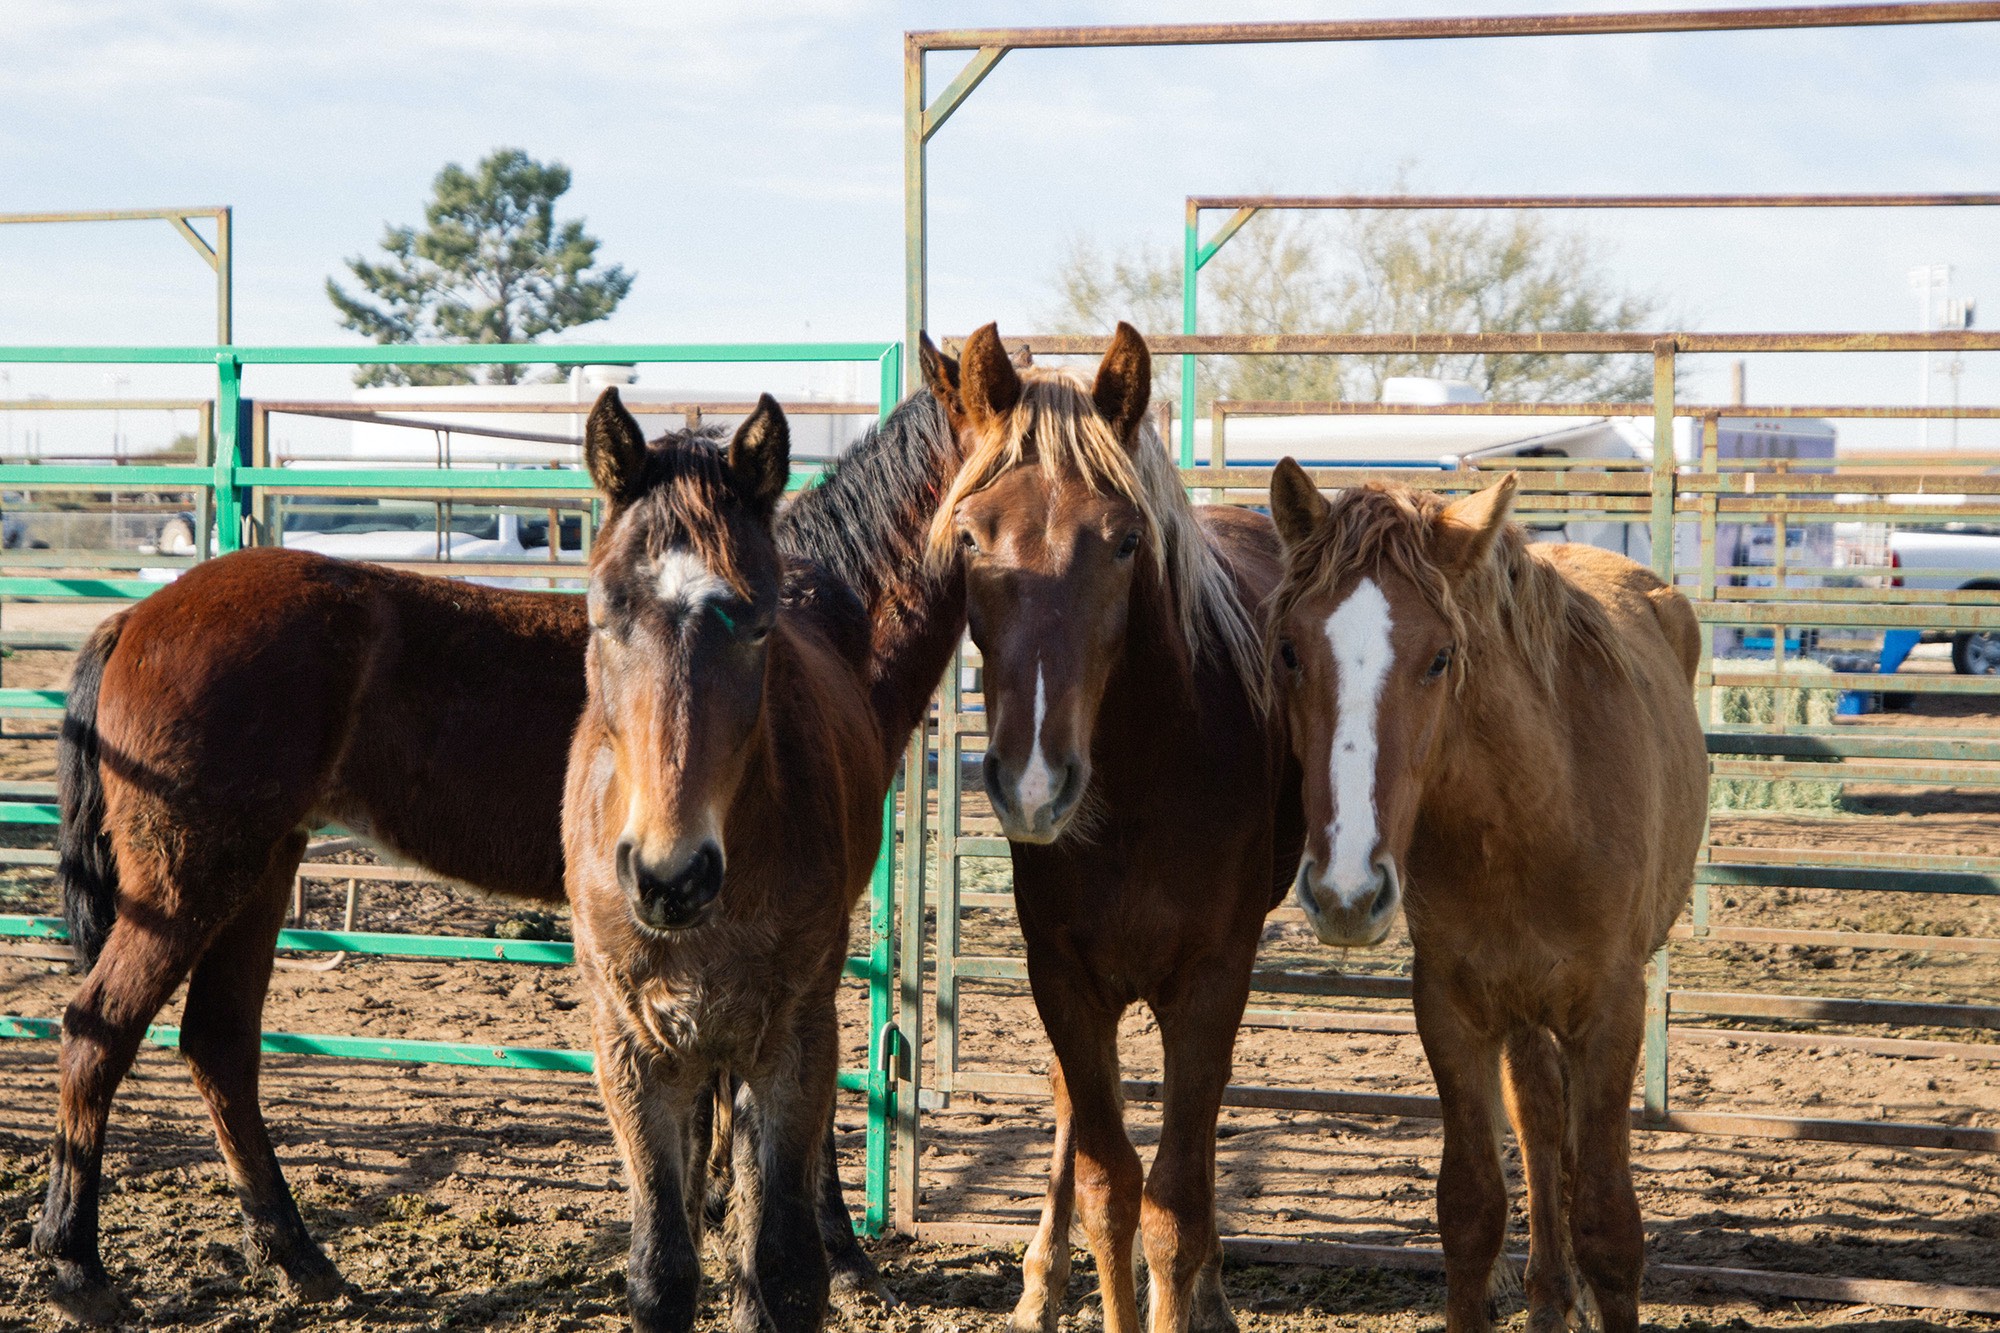 Feds offer financial incentive to help find homes for wild horses and burros